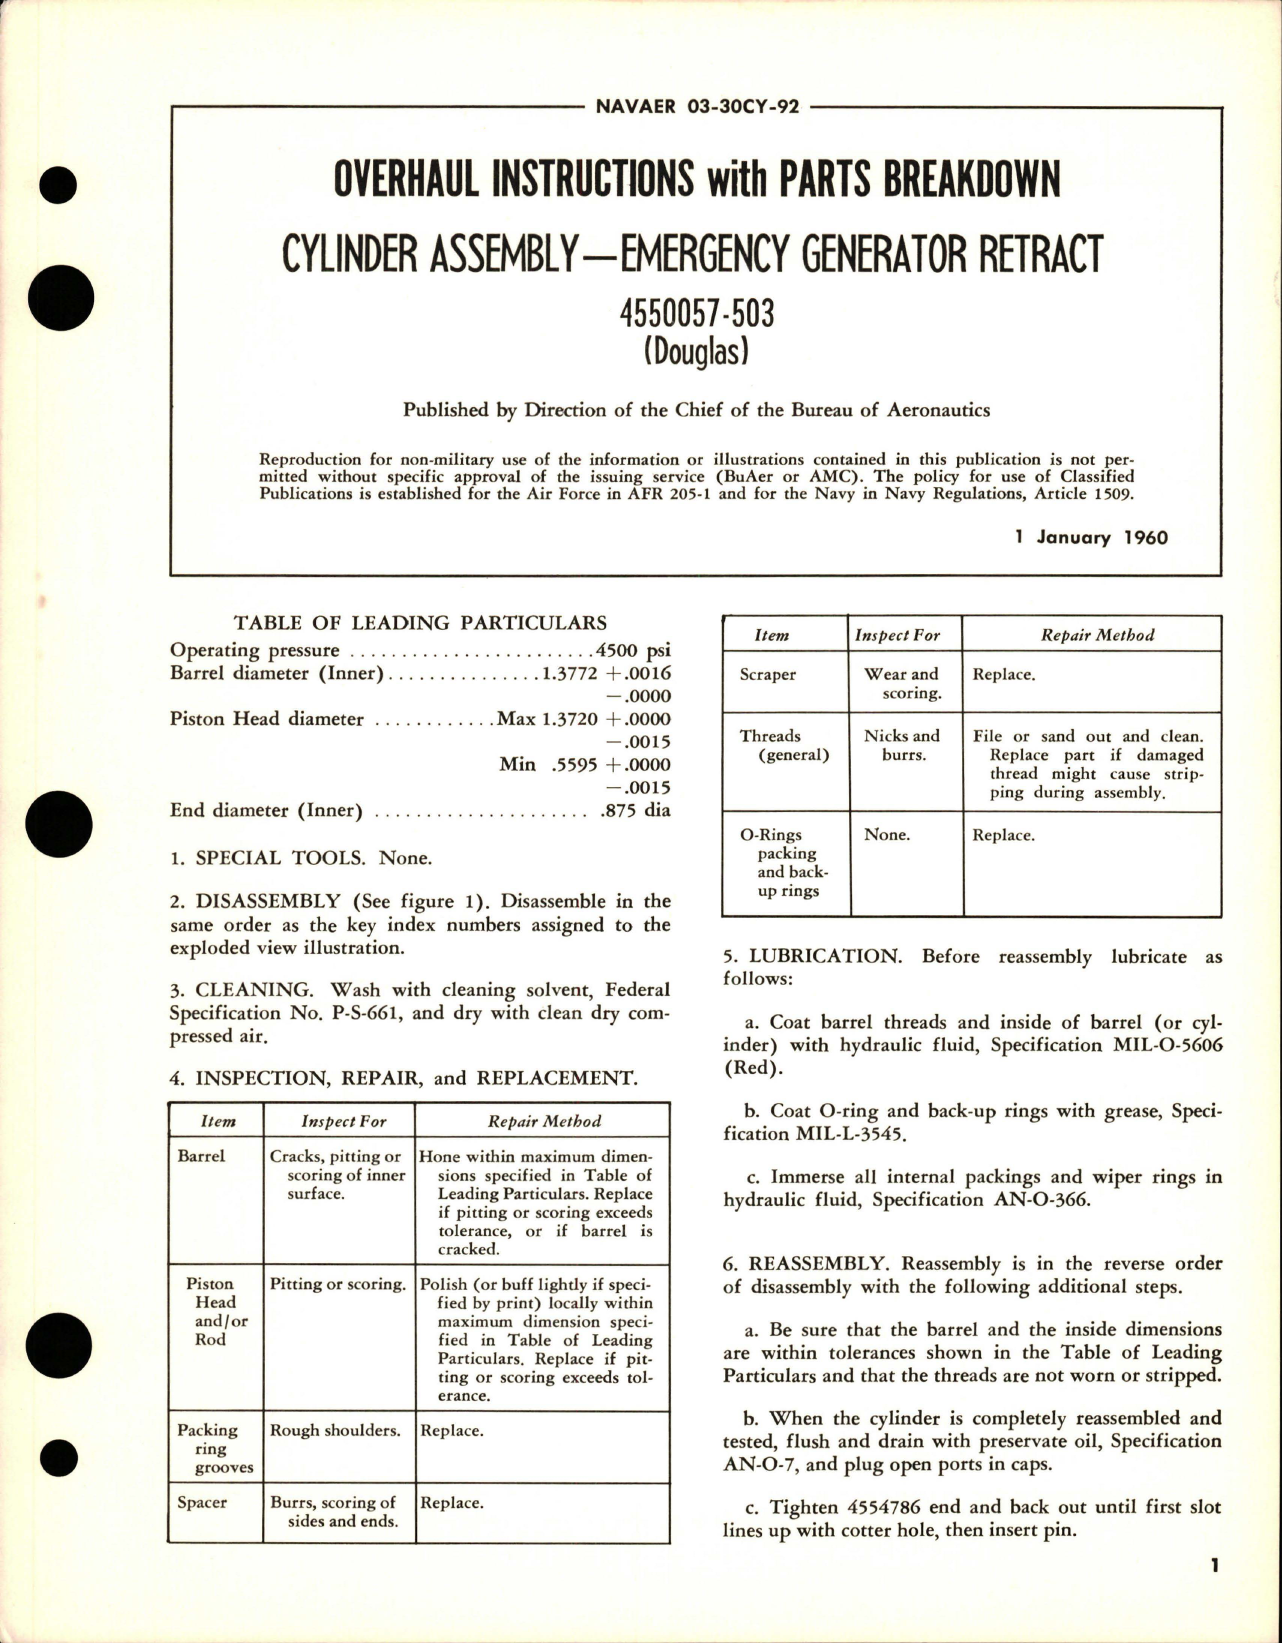 Sample page 1 from AirCorps Library document: Overhaul Instructions with Parts for Emergency Generator Retract Cylinder Assy - 4550057-503